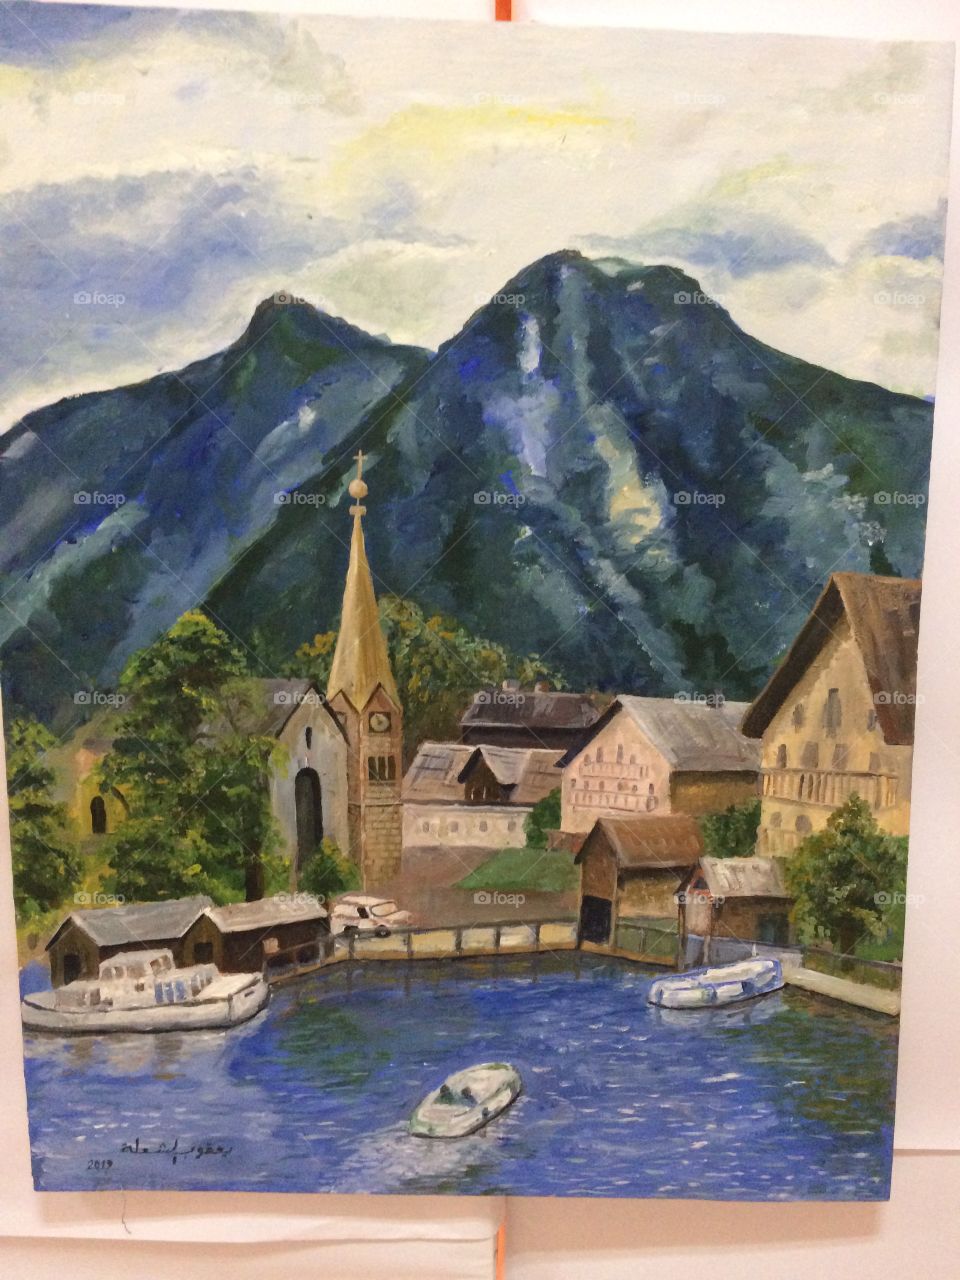 A beautiful painting of Switzerland in a museum 